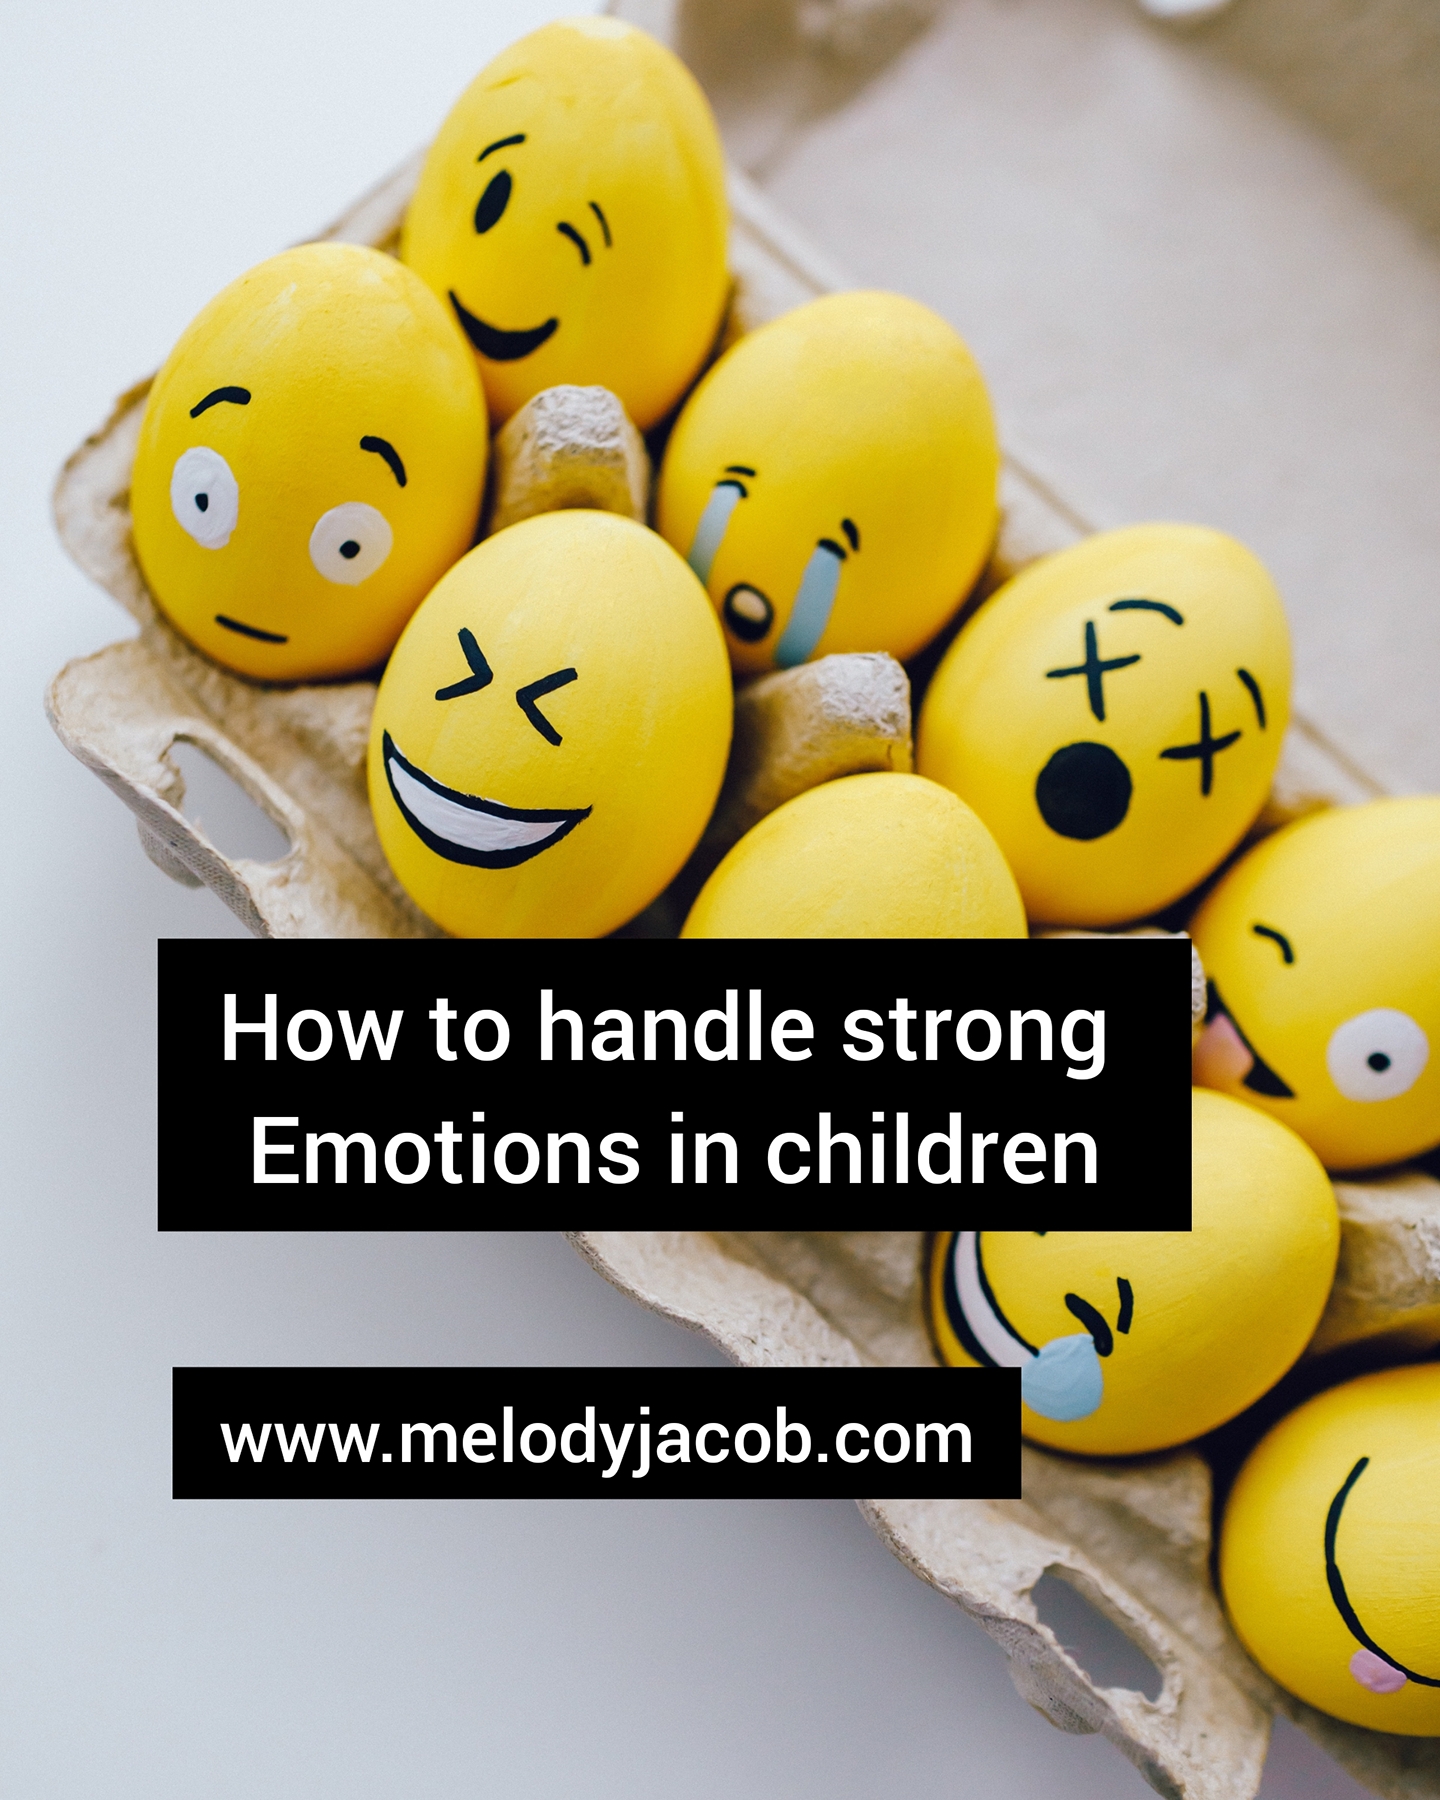 Helping children cope with strong emotions